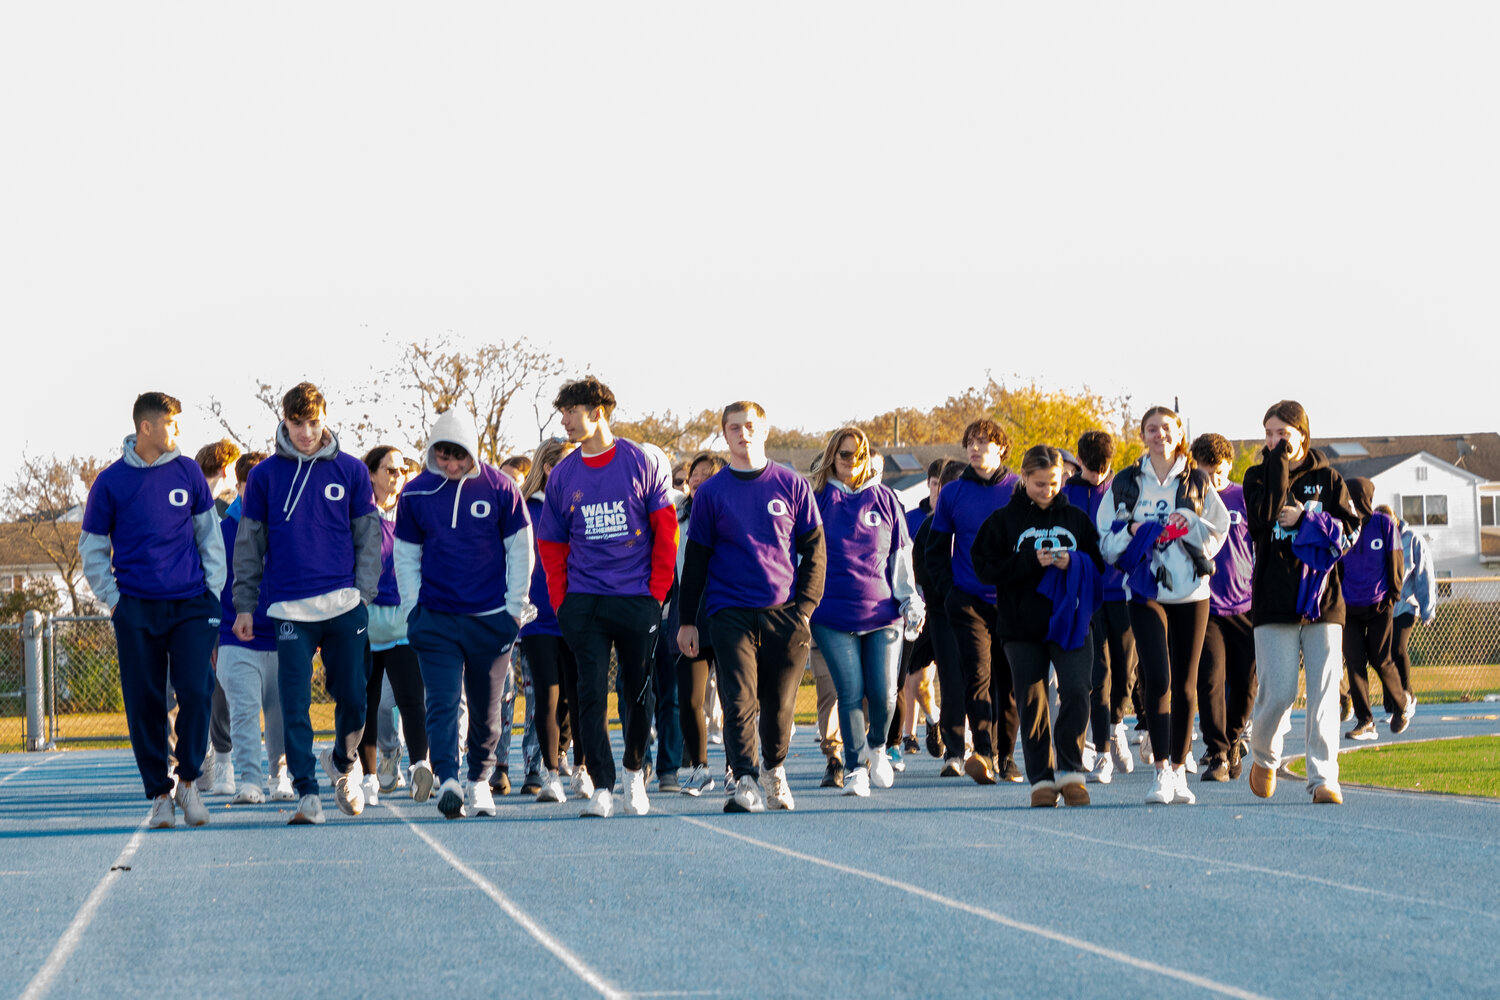 Participants strode around the football field at Oceanside High School’s first Walk to End Alzheimer’s on Nov. 19 to raise awareness of the disorder.